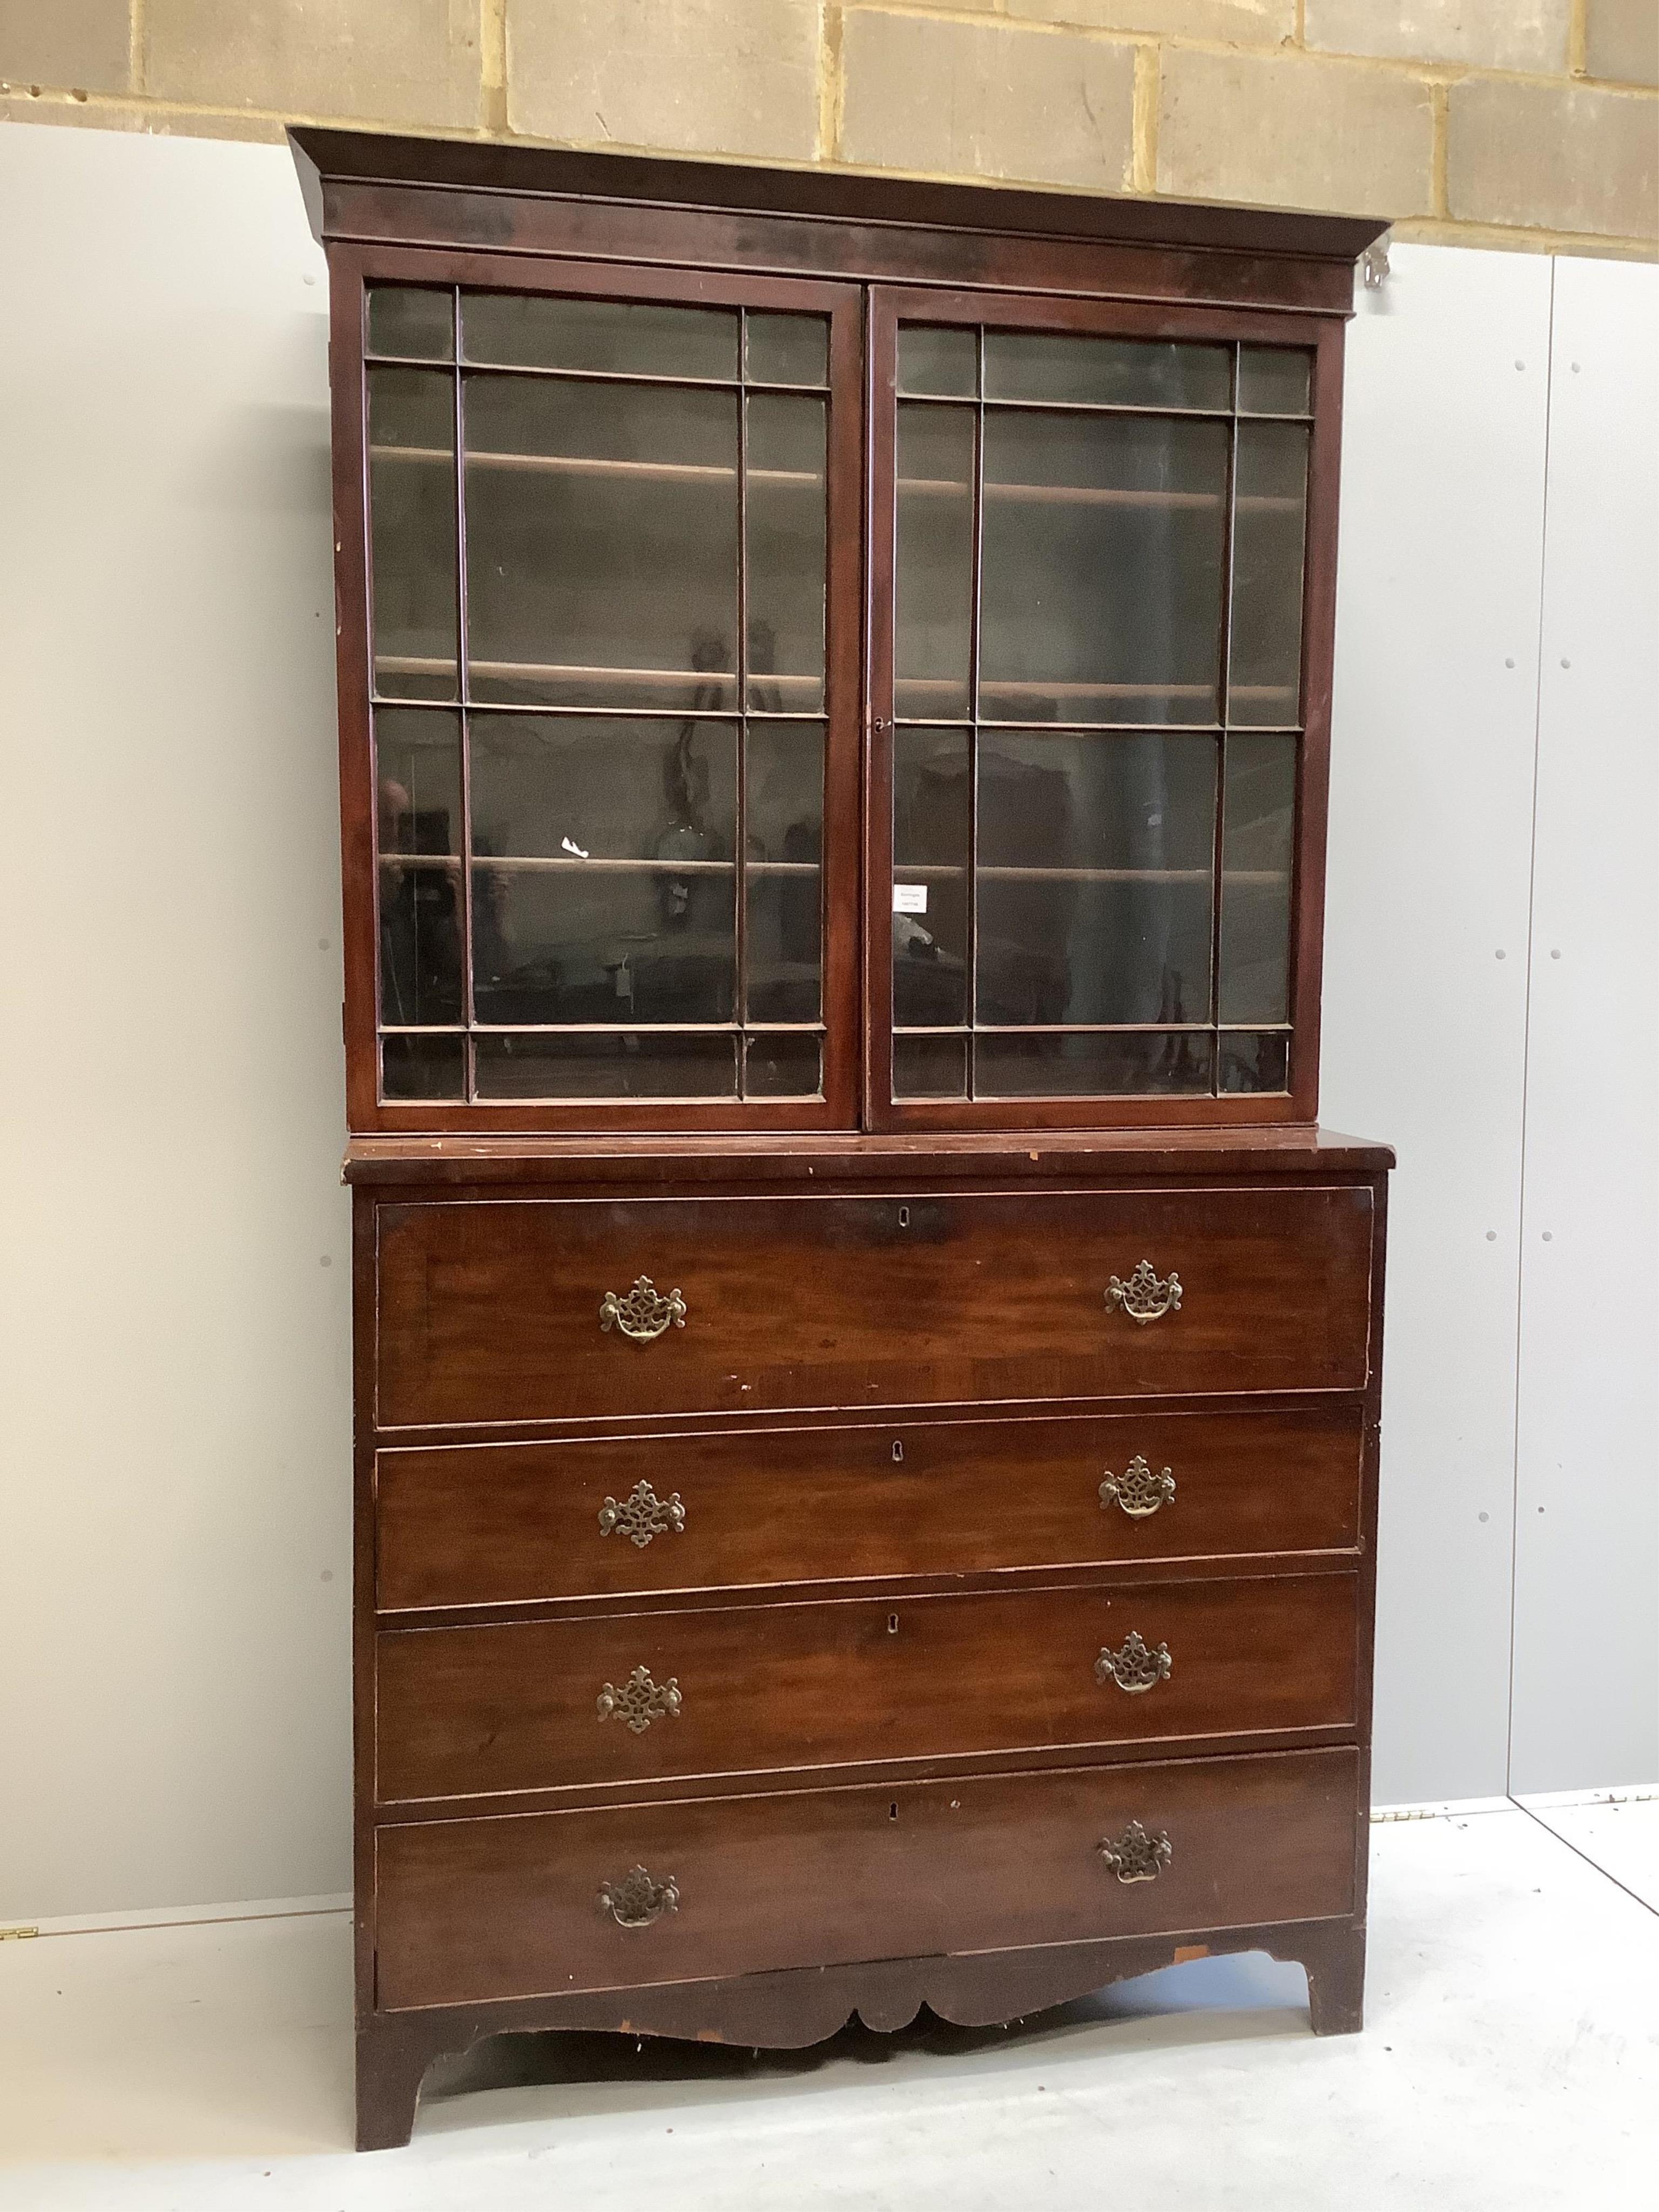 A Regency mahogany secretaire chest, with a later glazed bookcase over, width 121cm, depth 53cm, height 221cm. Condition - poor